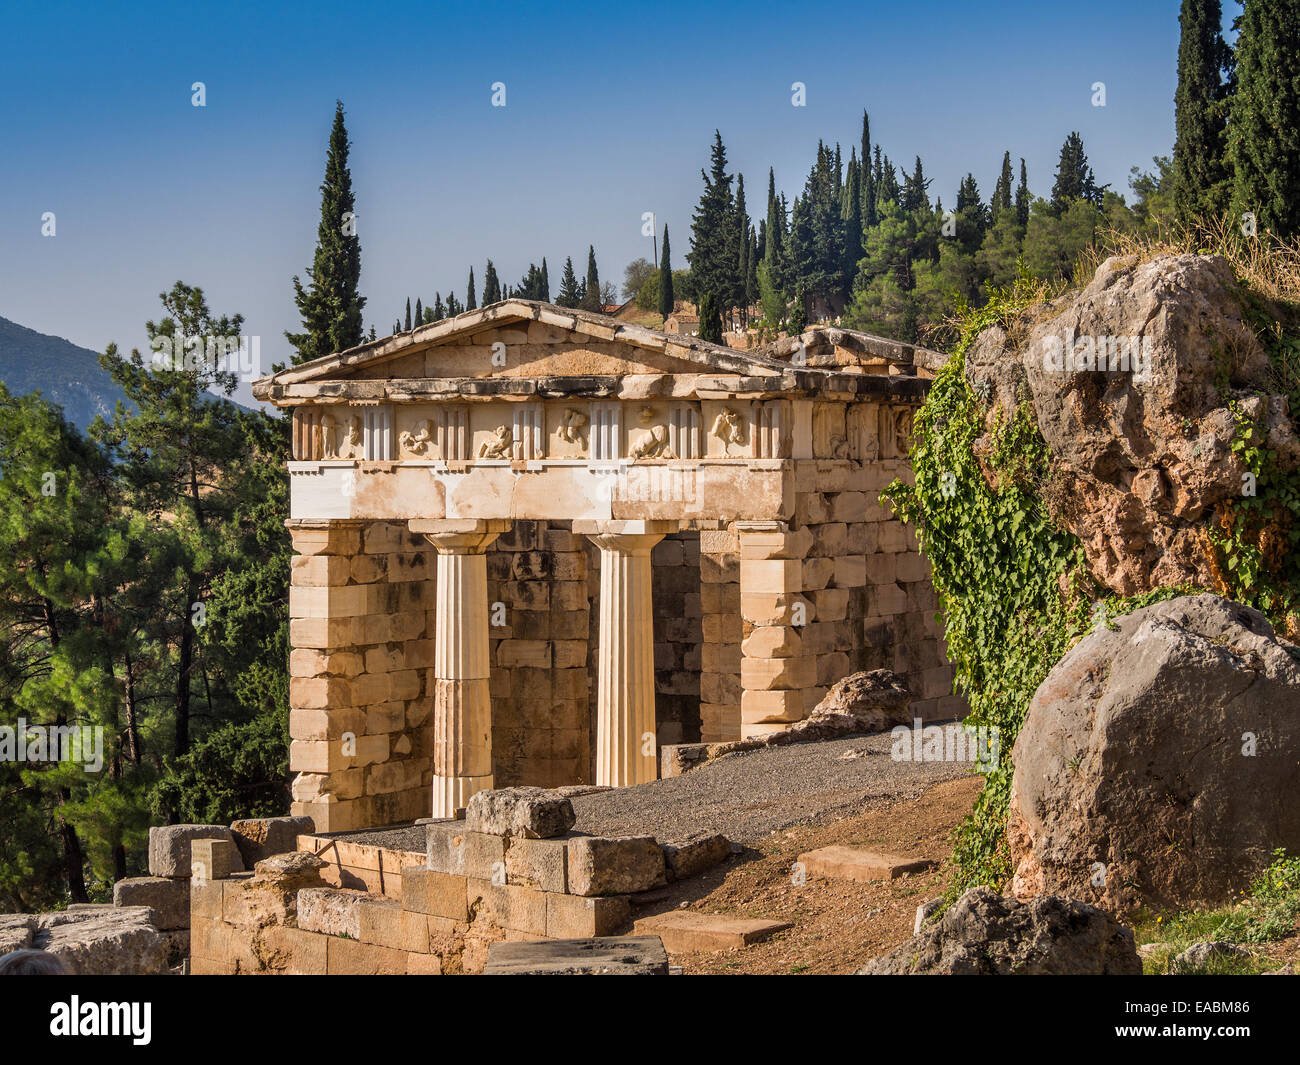 The reconstructed Treasury of Delphi, Greece, built to commemorate their victory at the Battle of Marathon. Stock Photo